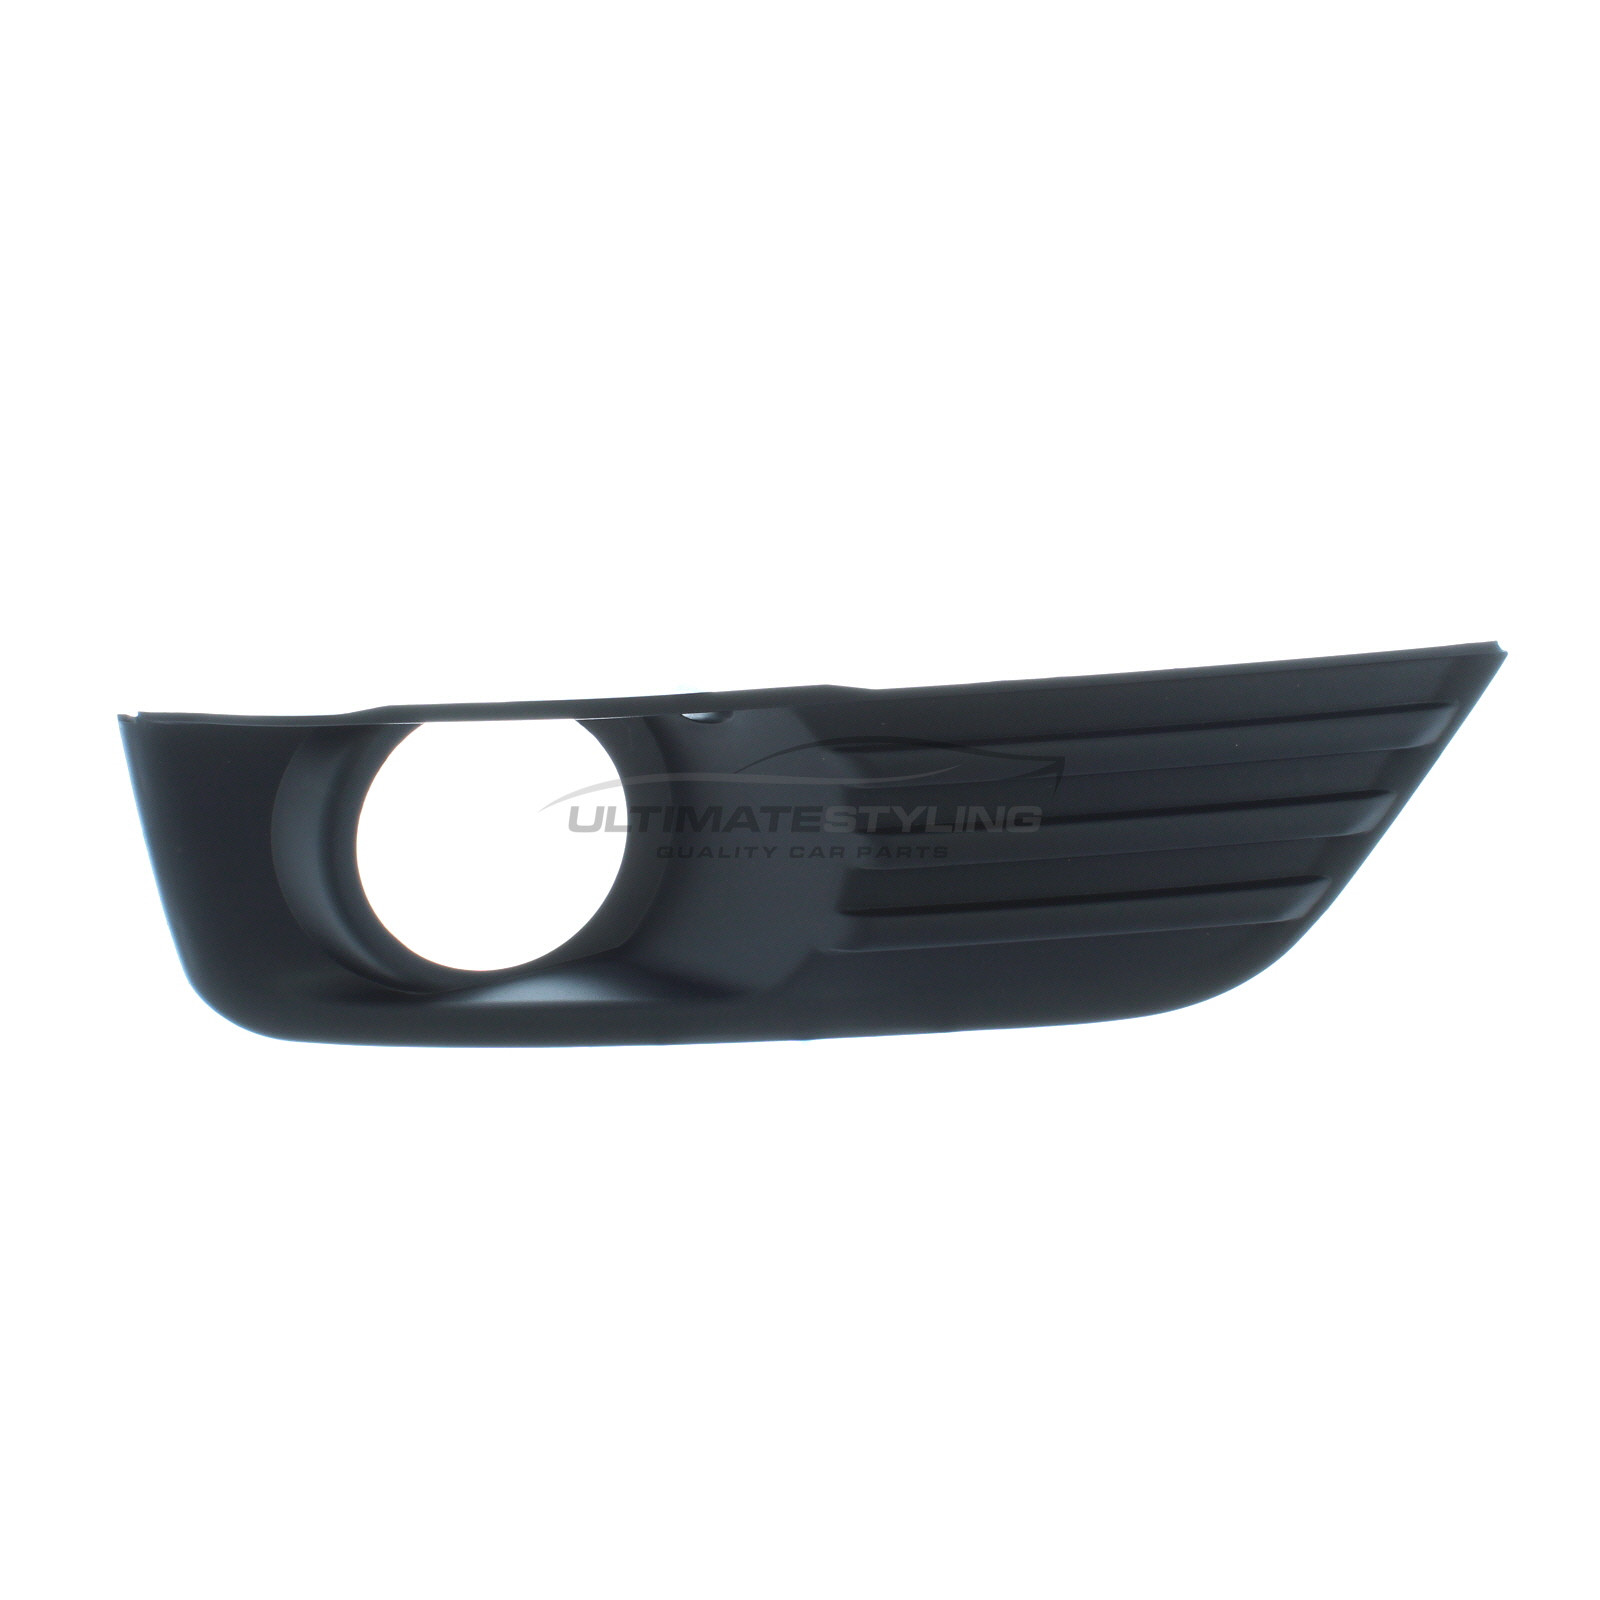 Ford Focus Front Fog Light Surround - Drivers Side (RH)